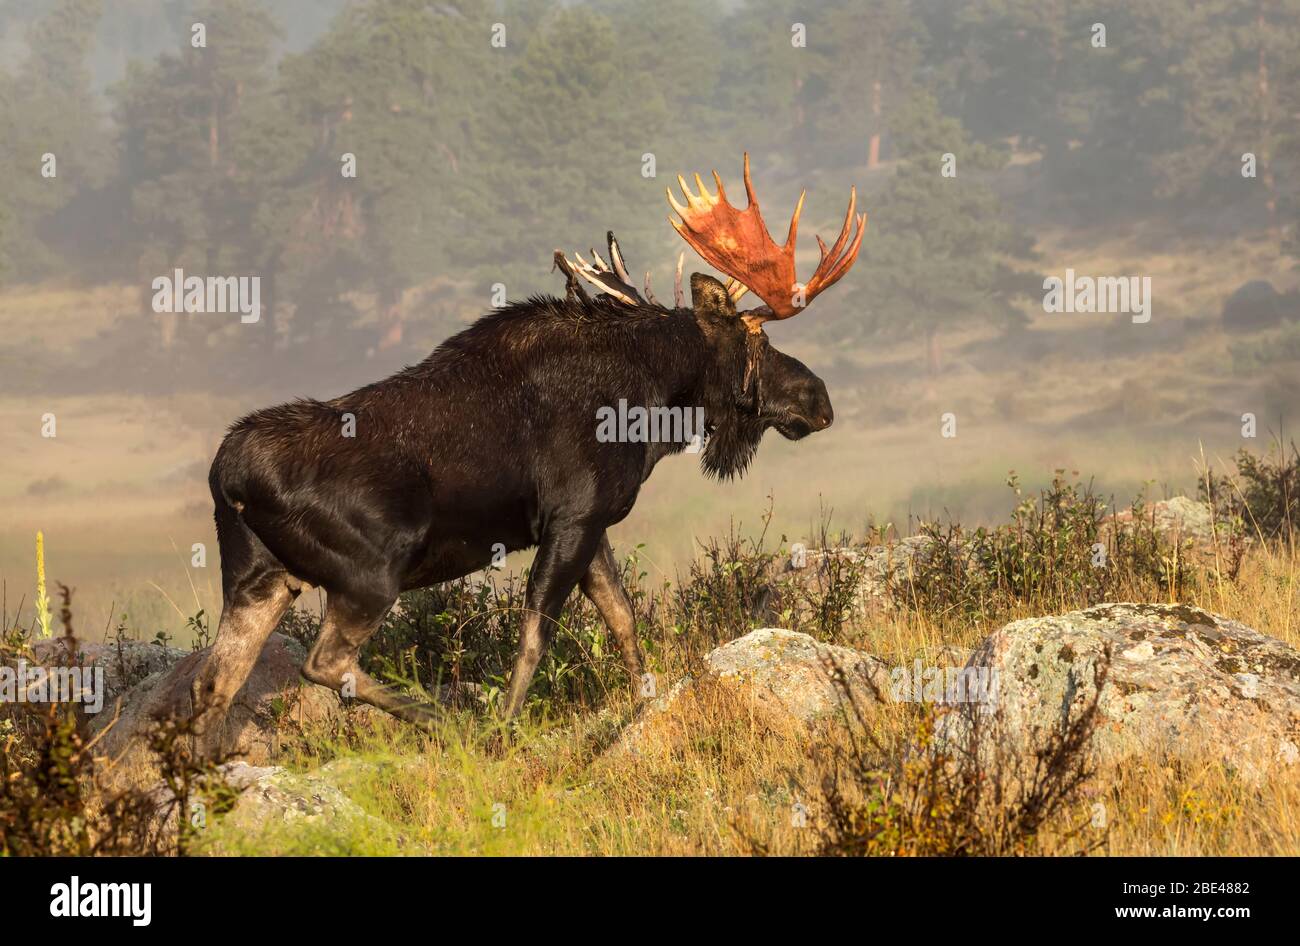 Bull moose (Alces alces) shedding velvet from antlers and walking through a field; Fort Collins, Colorado, United States of America Stock Photo